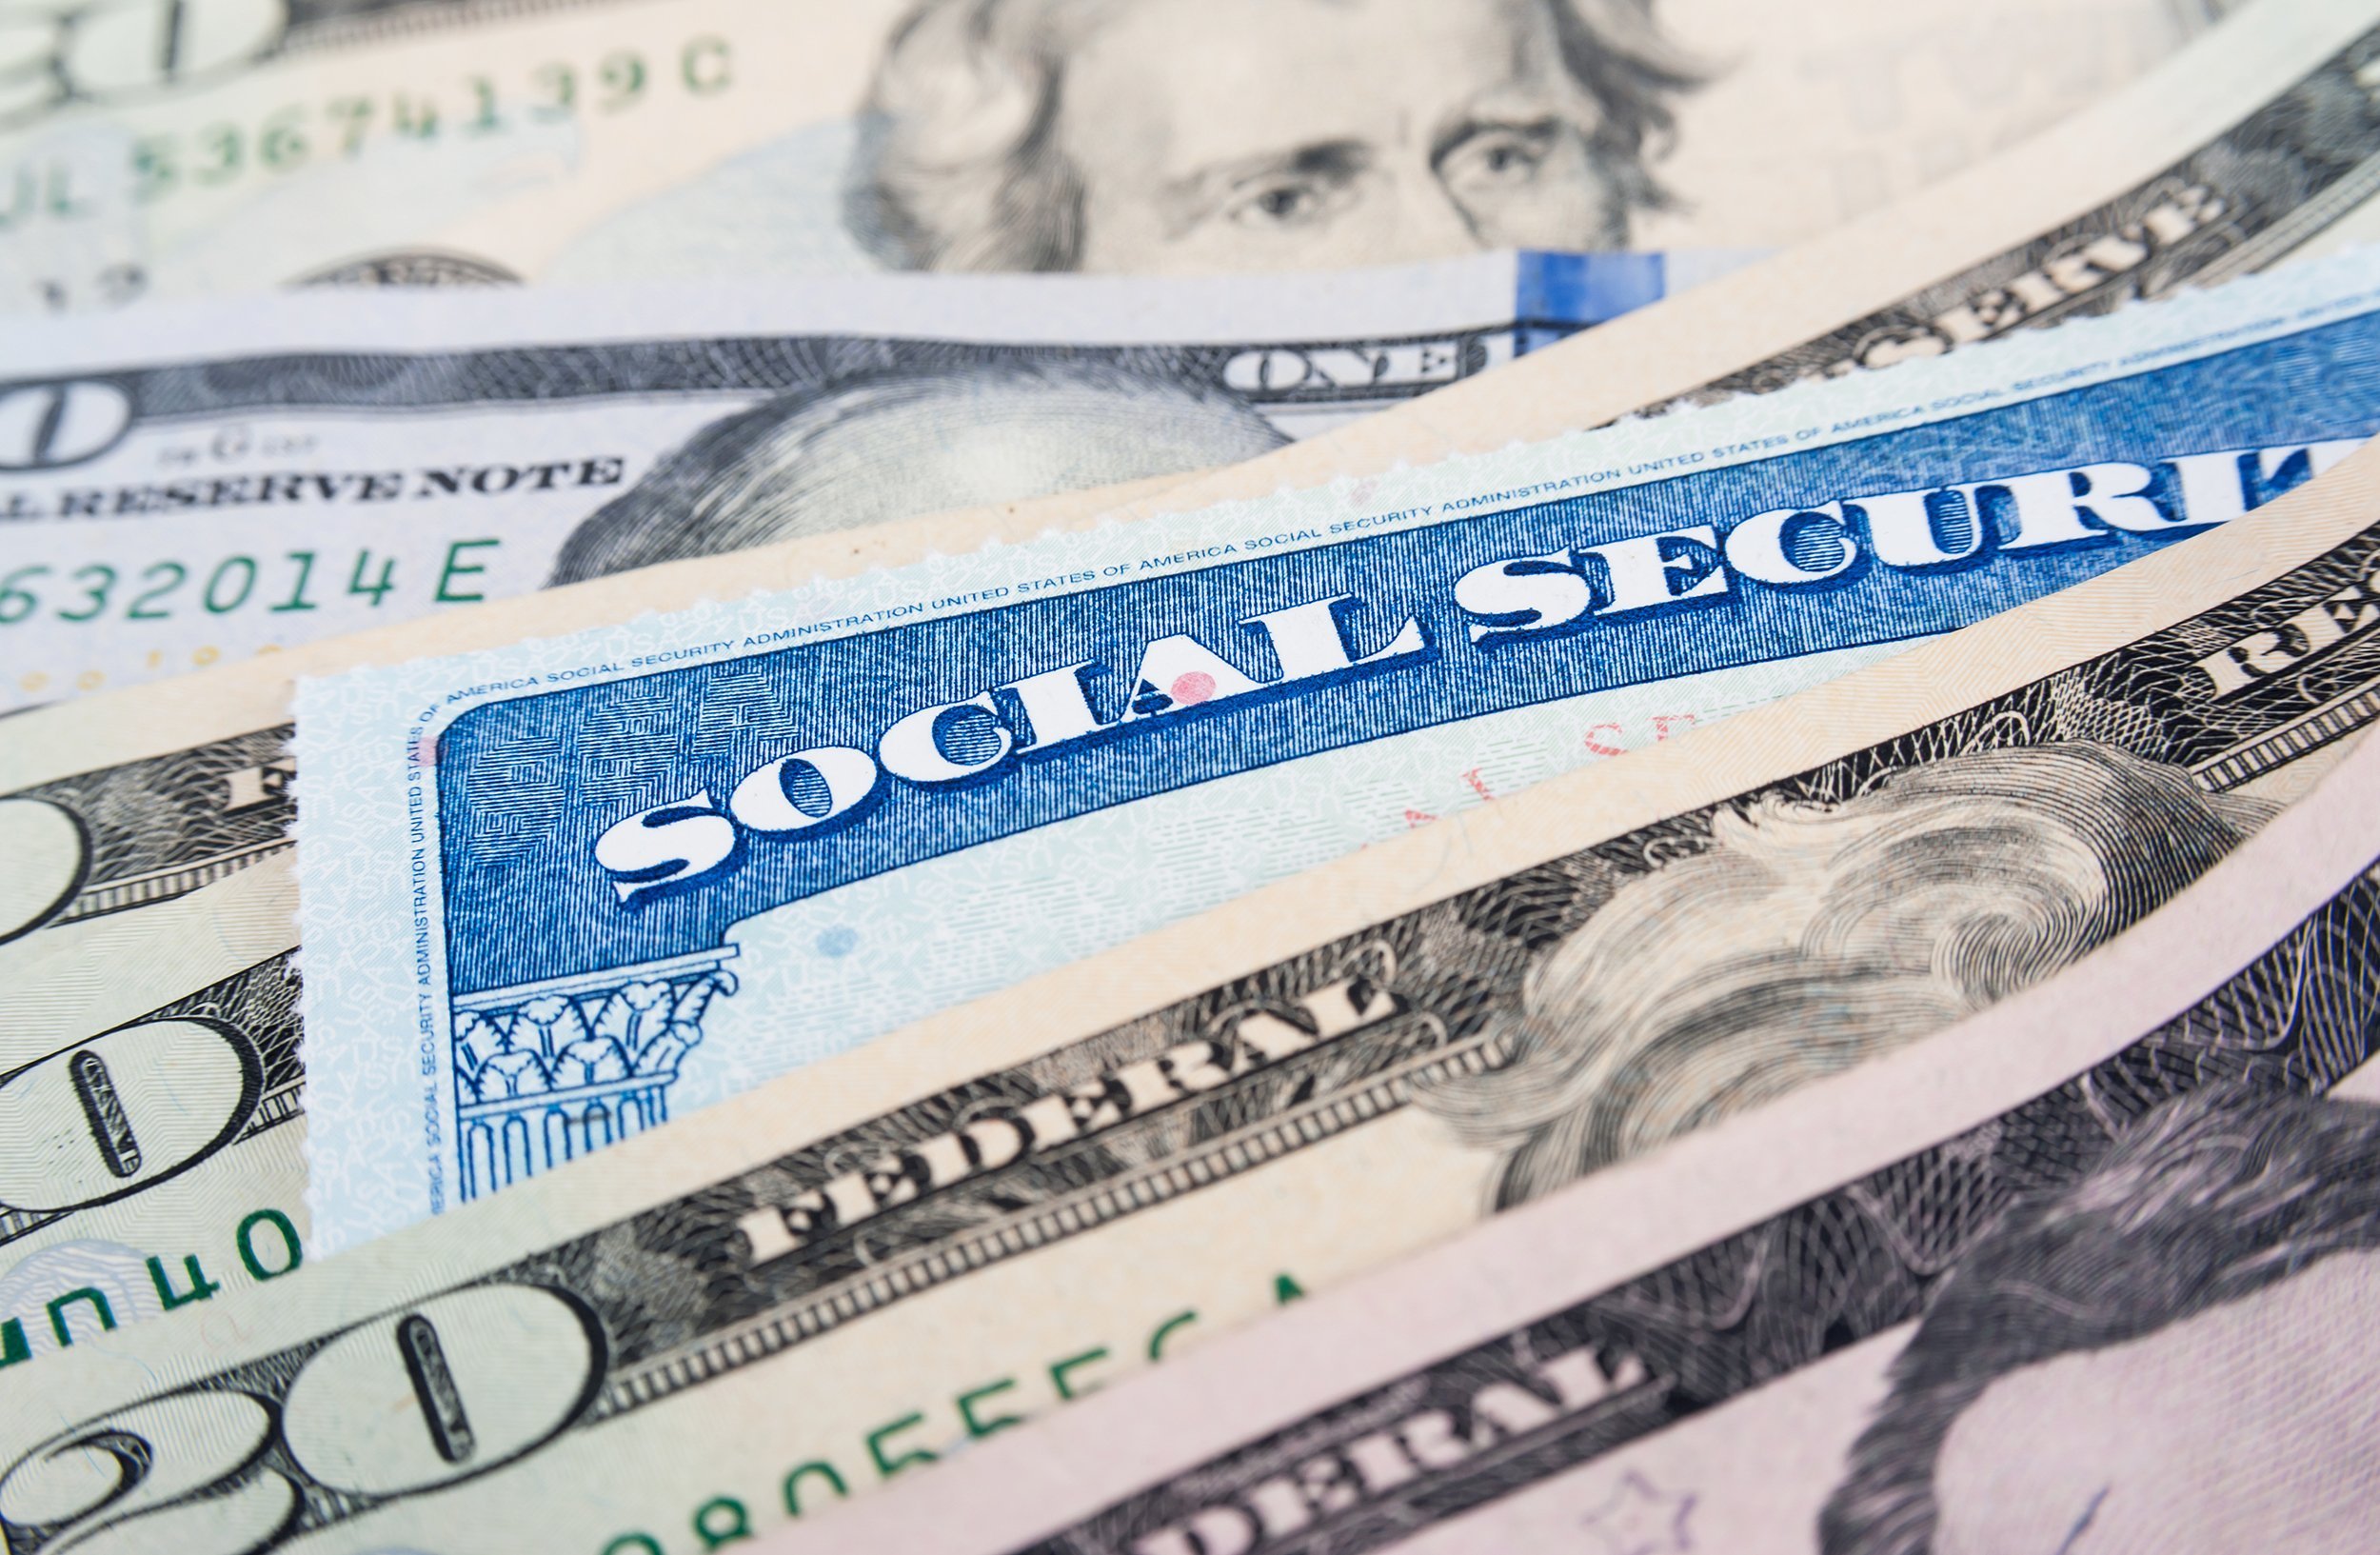 <p>In 37 states, <a href="https://blog.cheapism.com/retirement-without-savings/">Social Security benefits are not taxed</a>, either because there is no state income tax or because Social Security is subtracted from federal adjusted gross income. At the federal level, if income is under $25,000 for a single person or $34,000 for a couple, Social Security benefits are taxed up to 50%. Above that,  85% of those benefits are taxed, depending on income.</p>